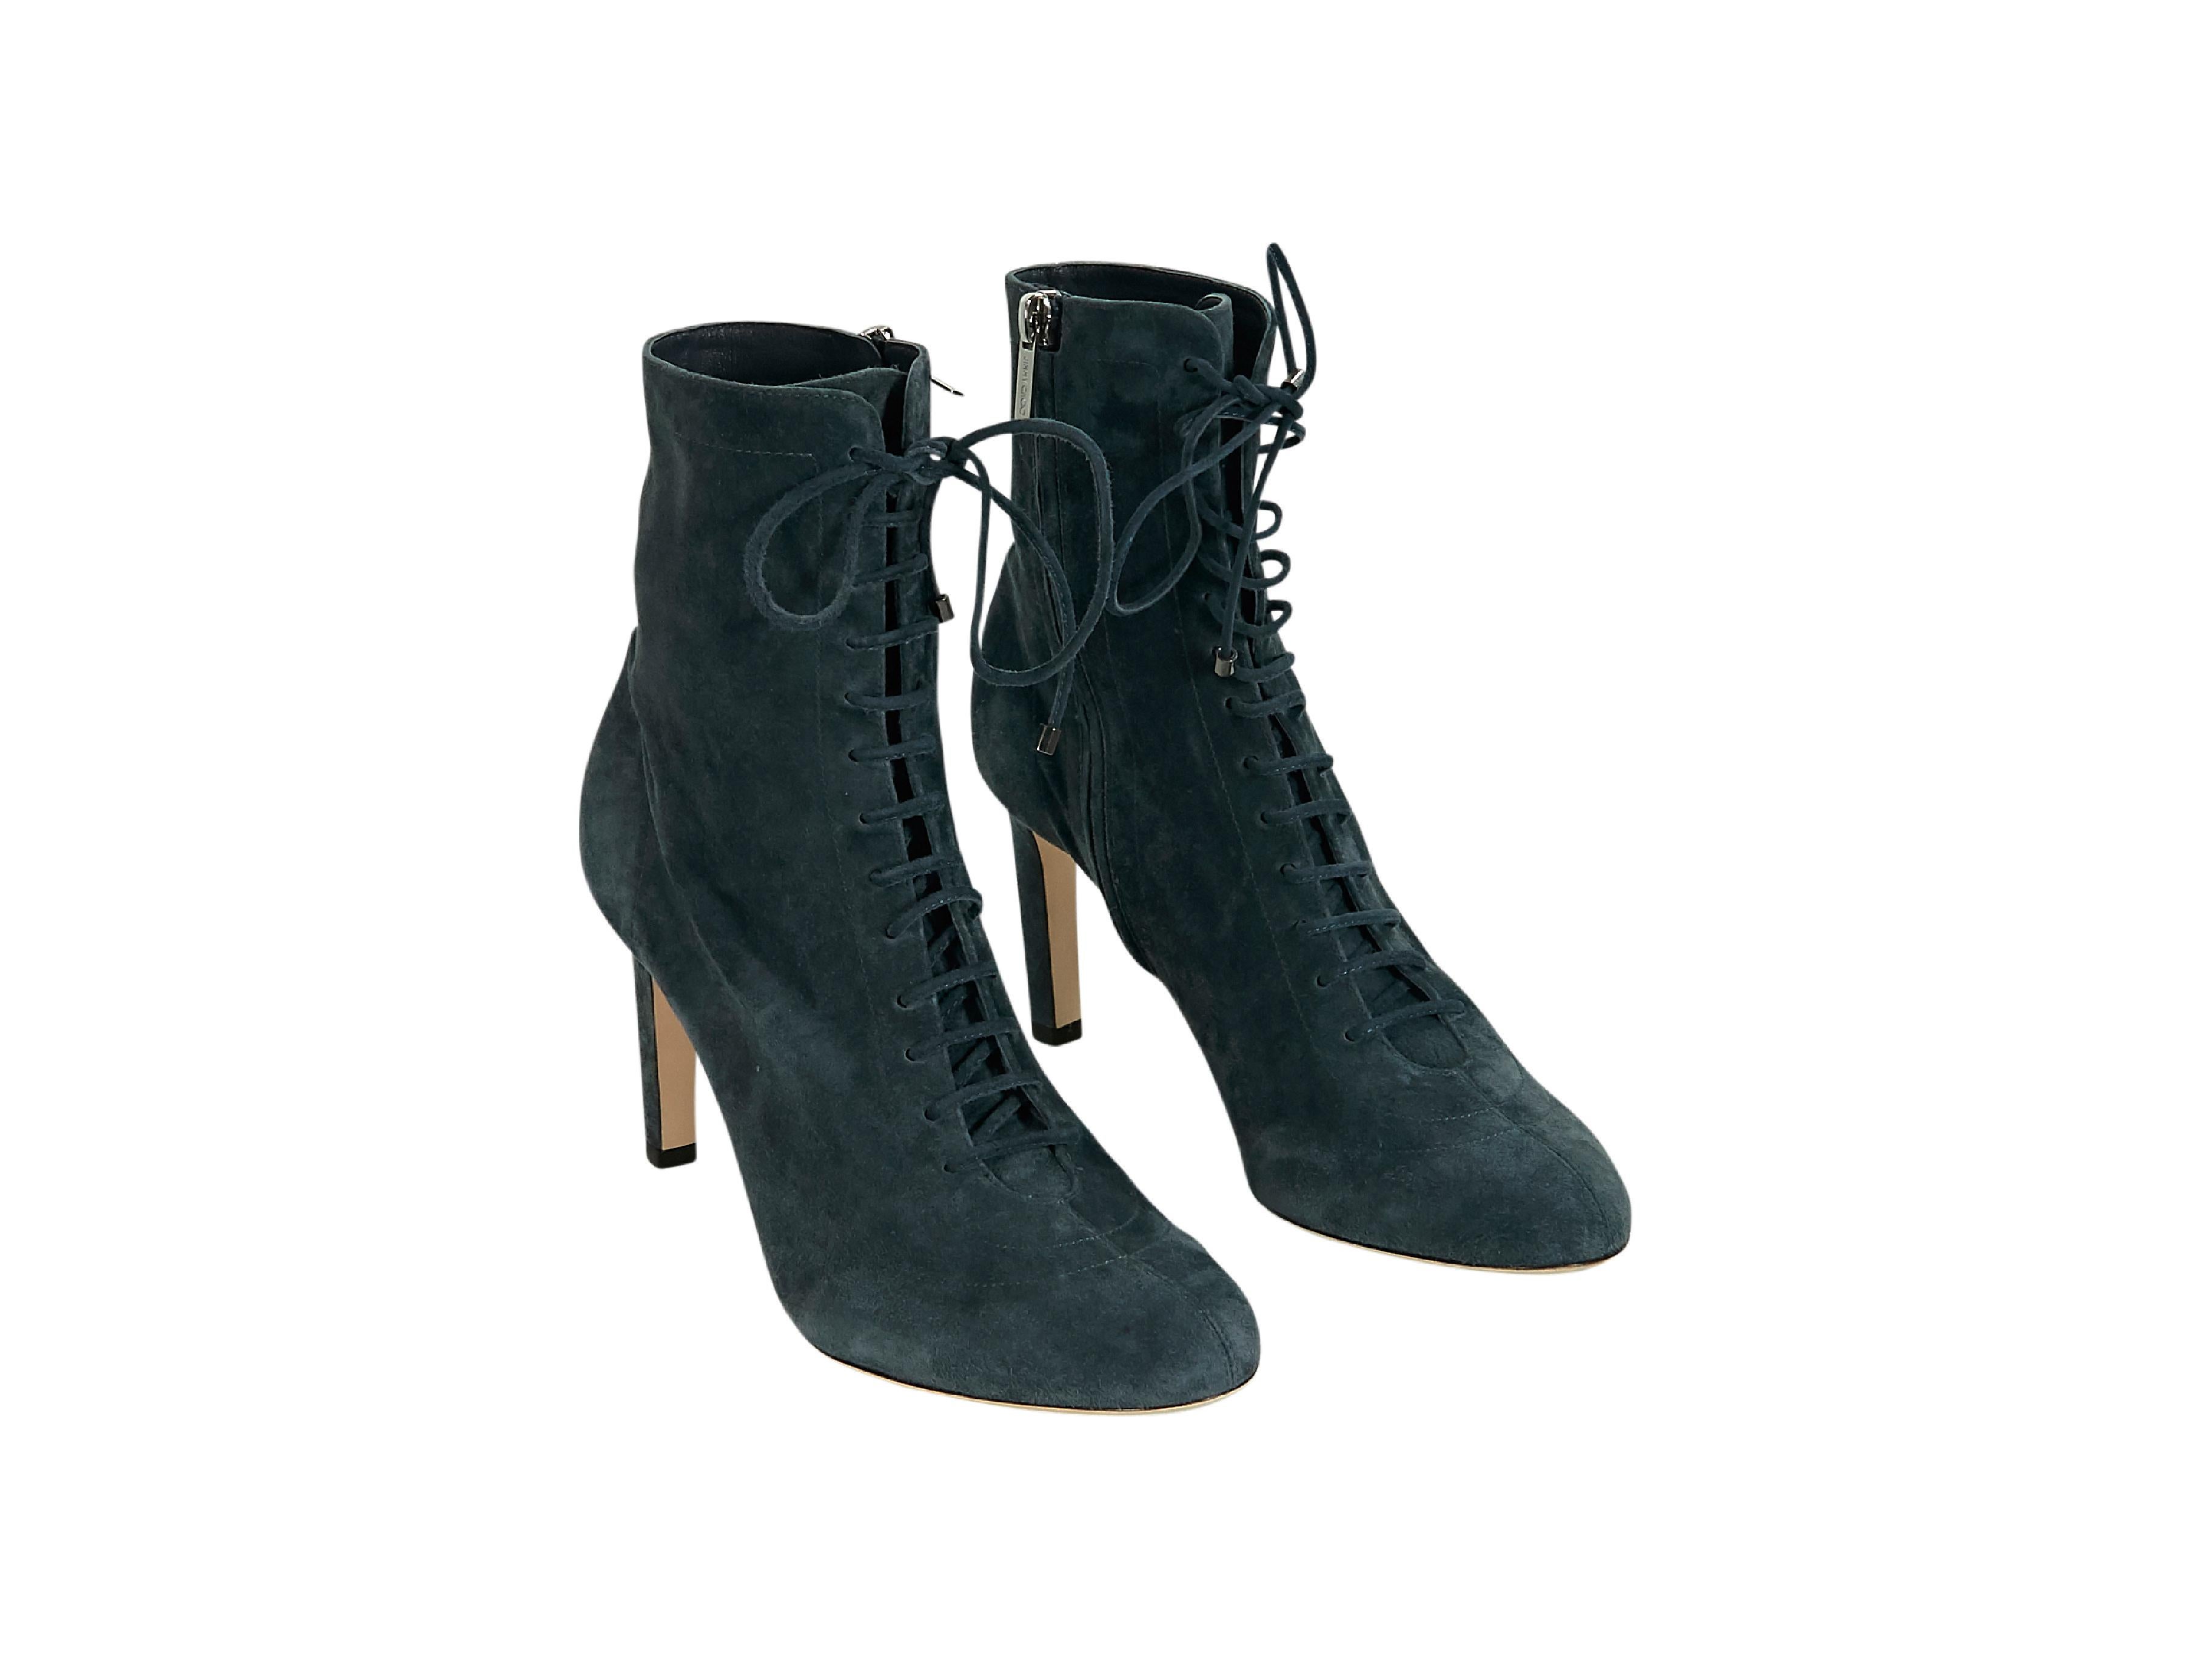 Black Teal Jimmy Choo Suede Ankle Boots